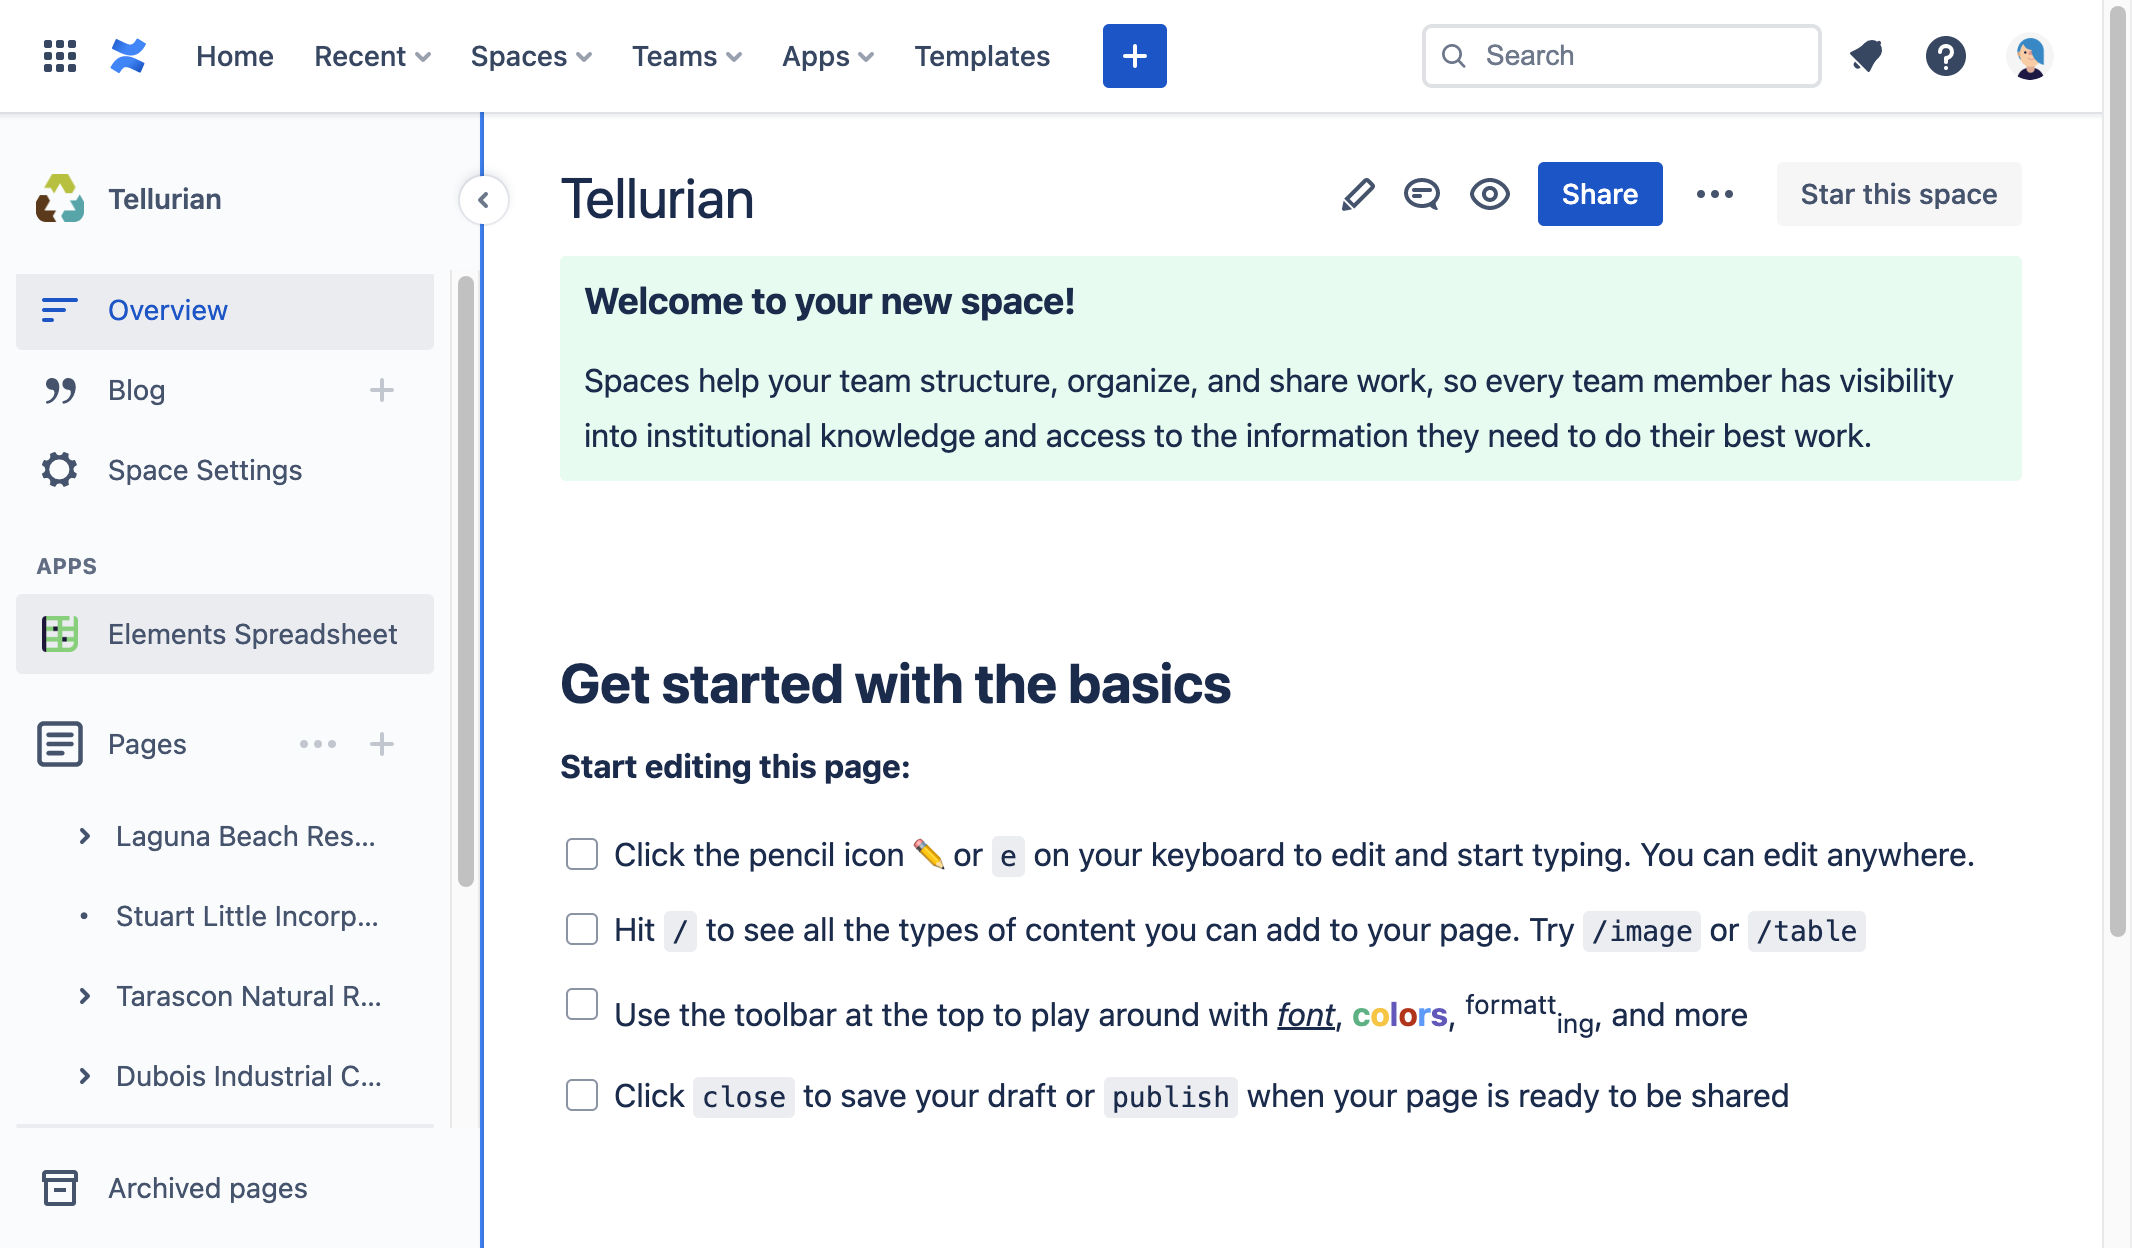 Sunny needs a Risk template available in Confluence for the Tellurian team. She'll create a new custom template with Elements Spreadsheet.